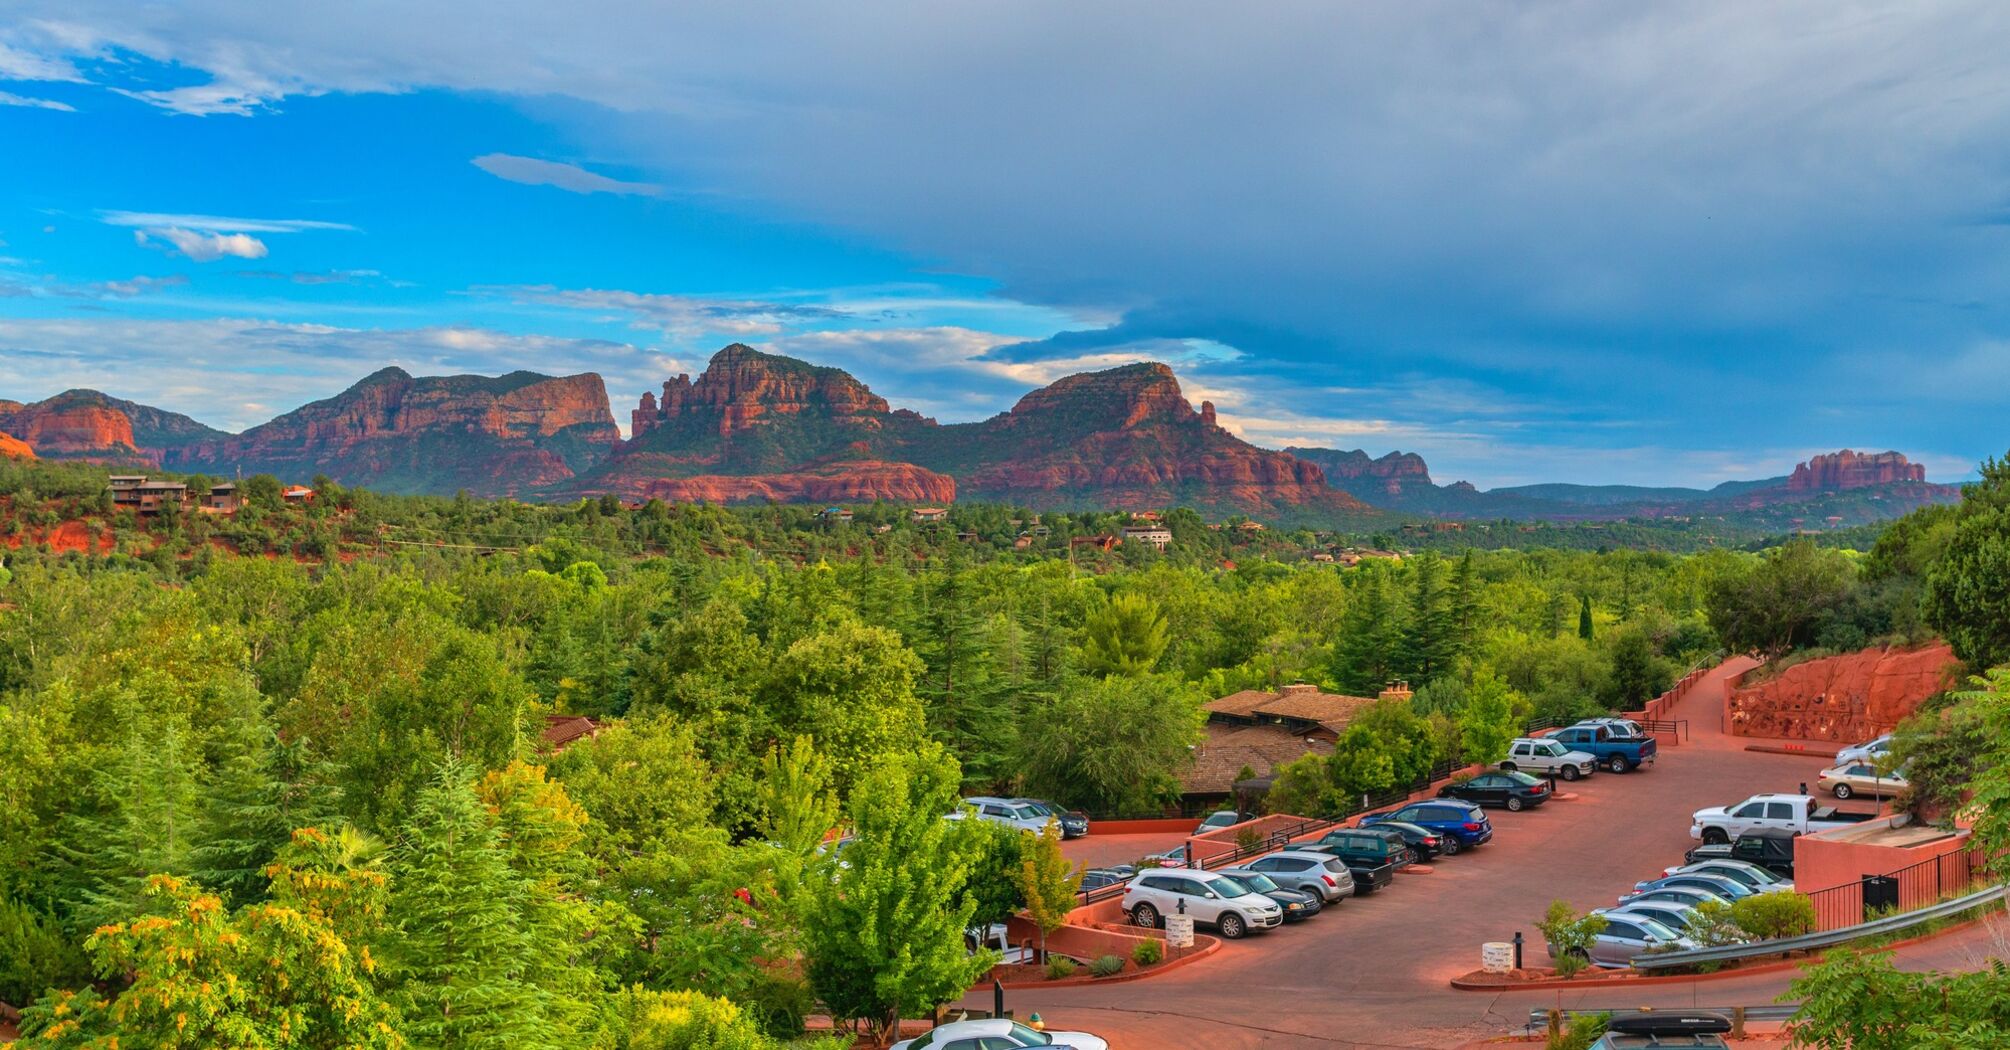 Healing and spiritual practices: 7 things to do in Sedona